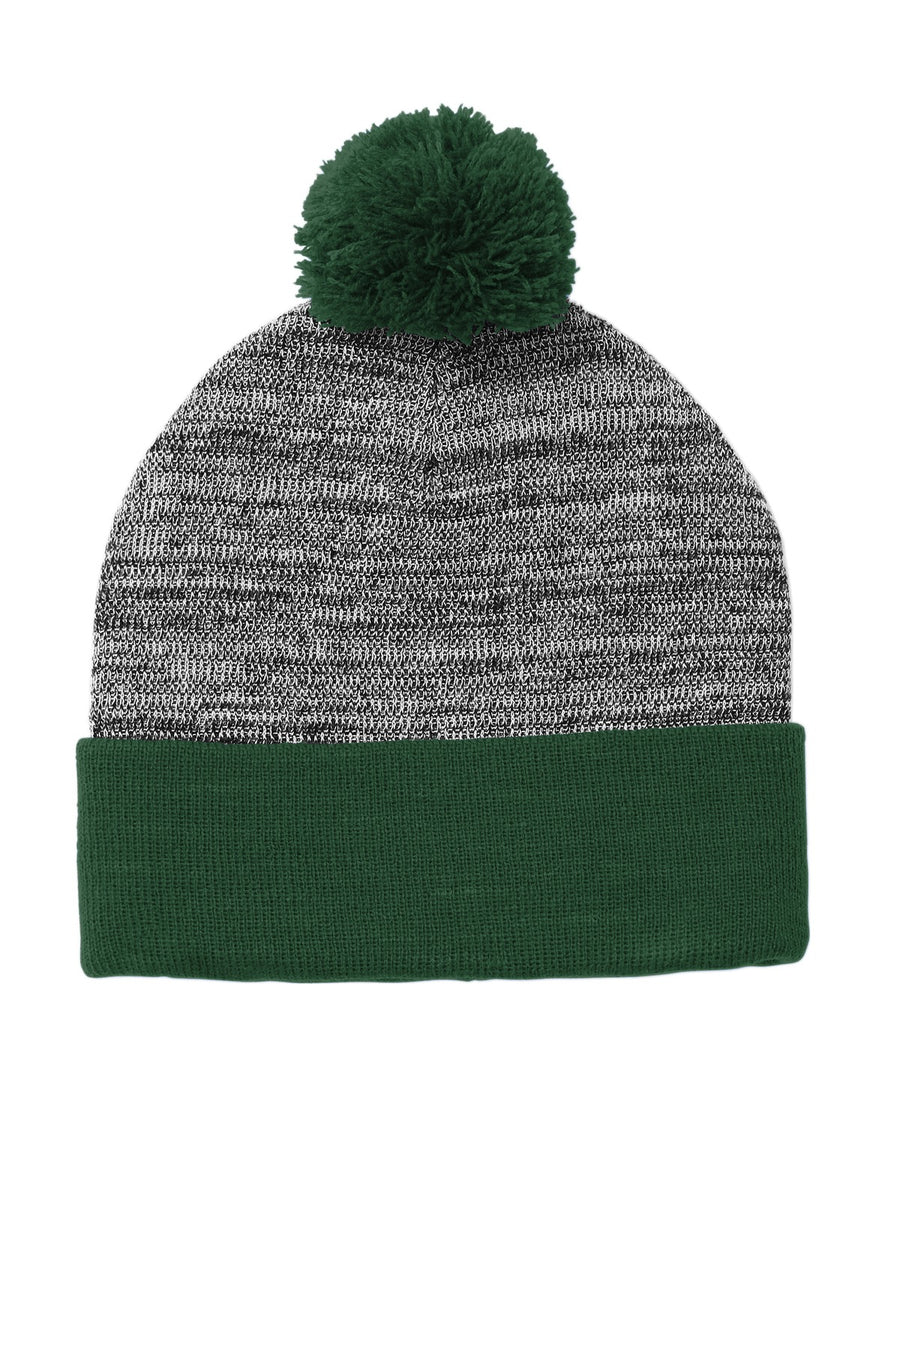 STC41-Forest Green/ Grey Heather-front_model